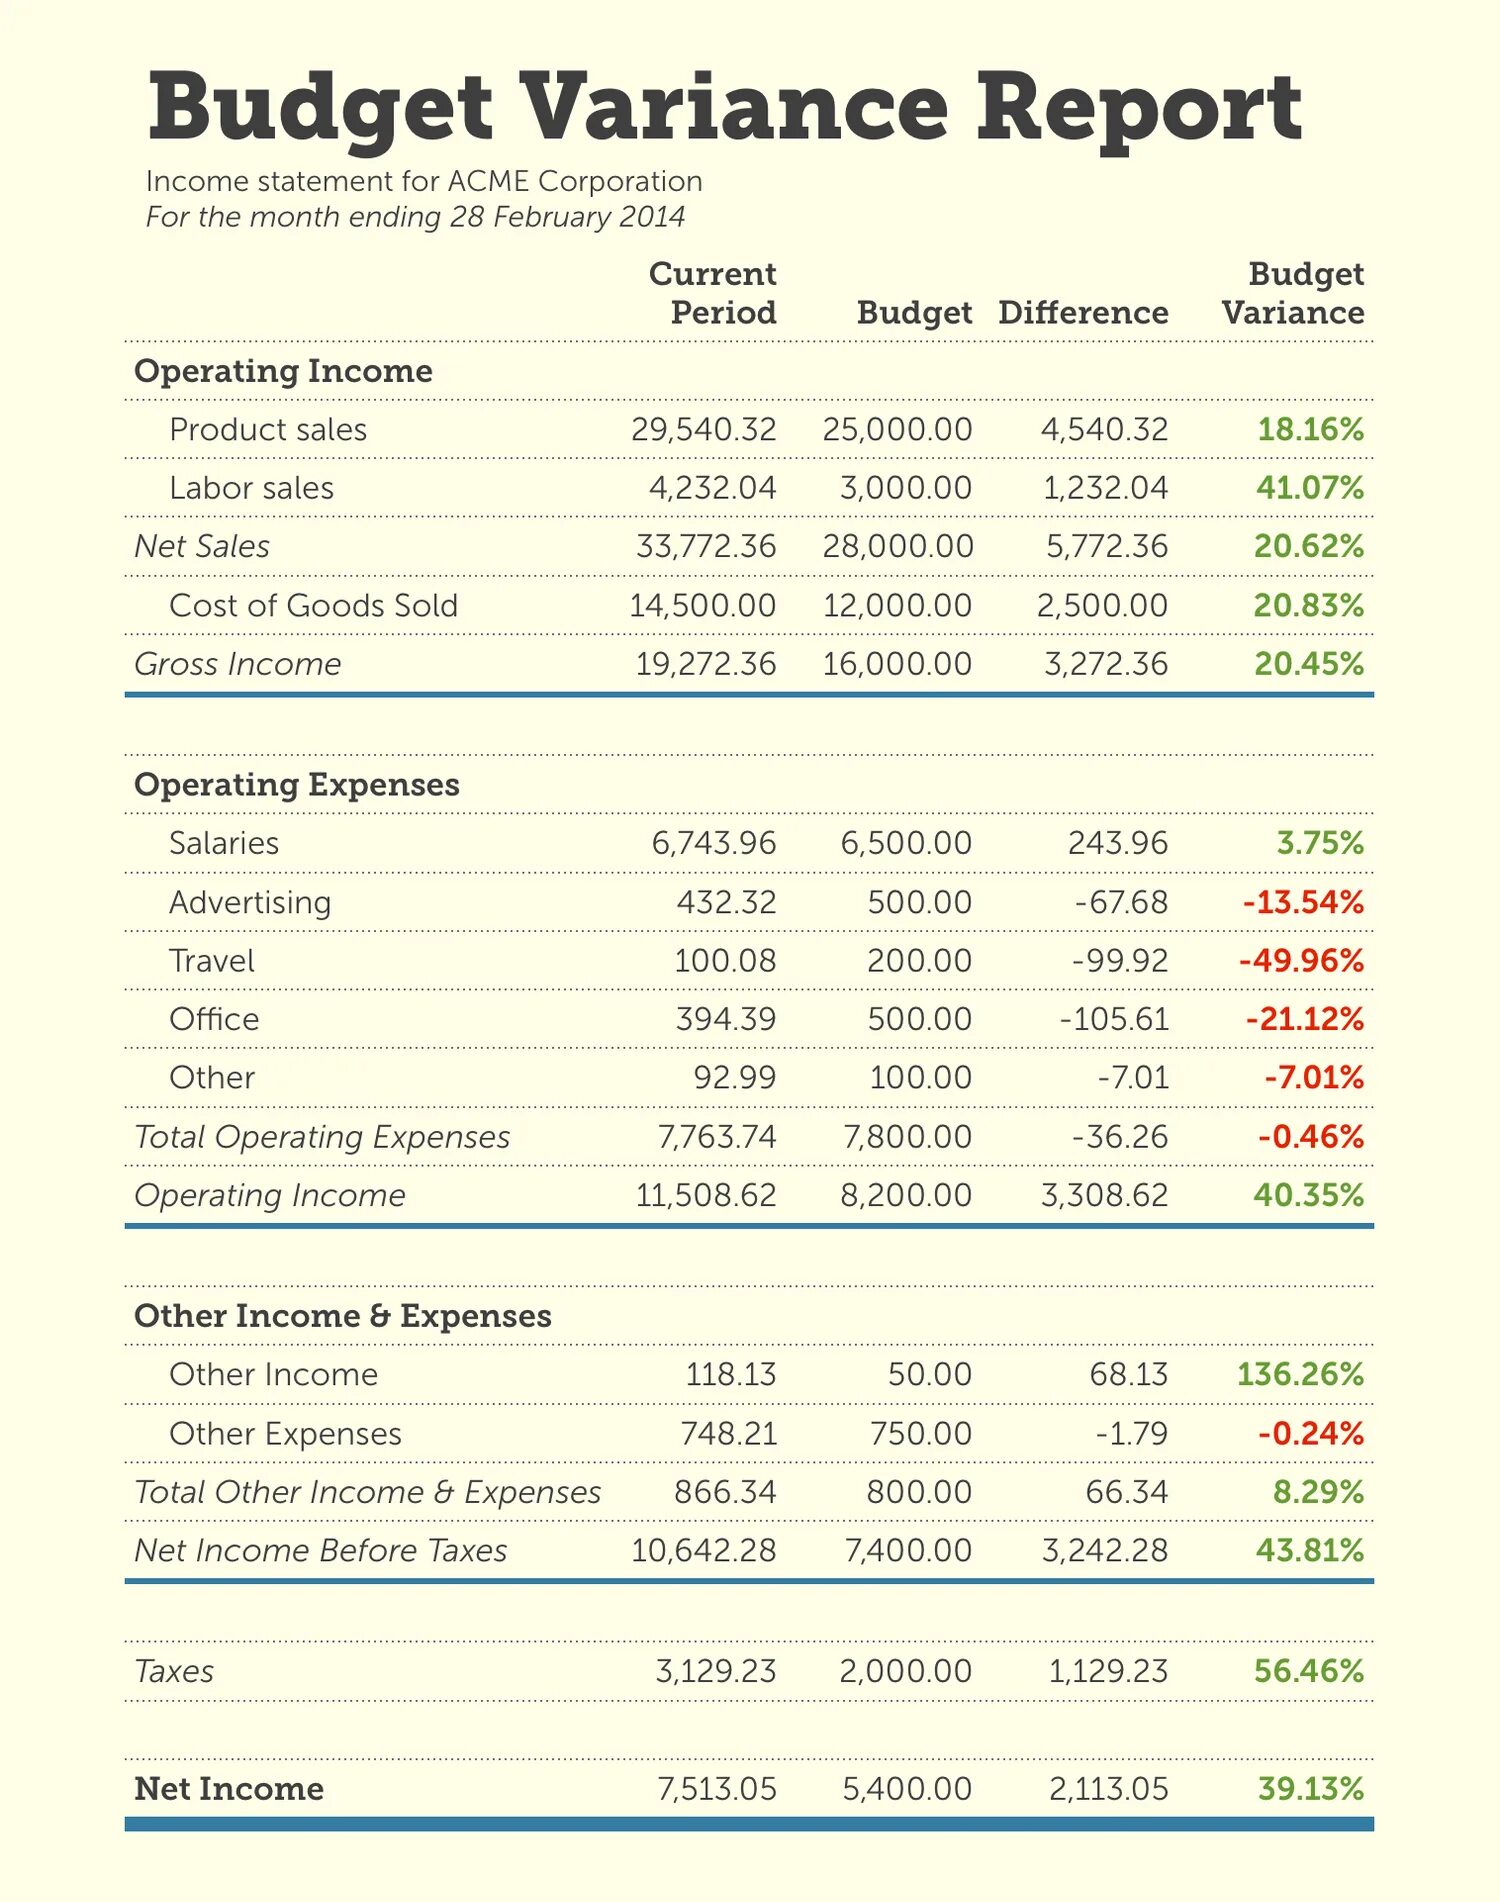 Operating Statement. Income Statement в бухгалтерии. Income and Expense Statement. Income Statement Template. Variant report